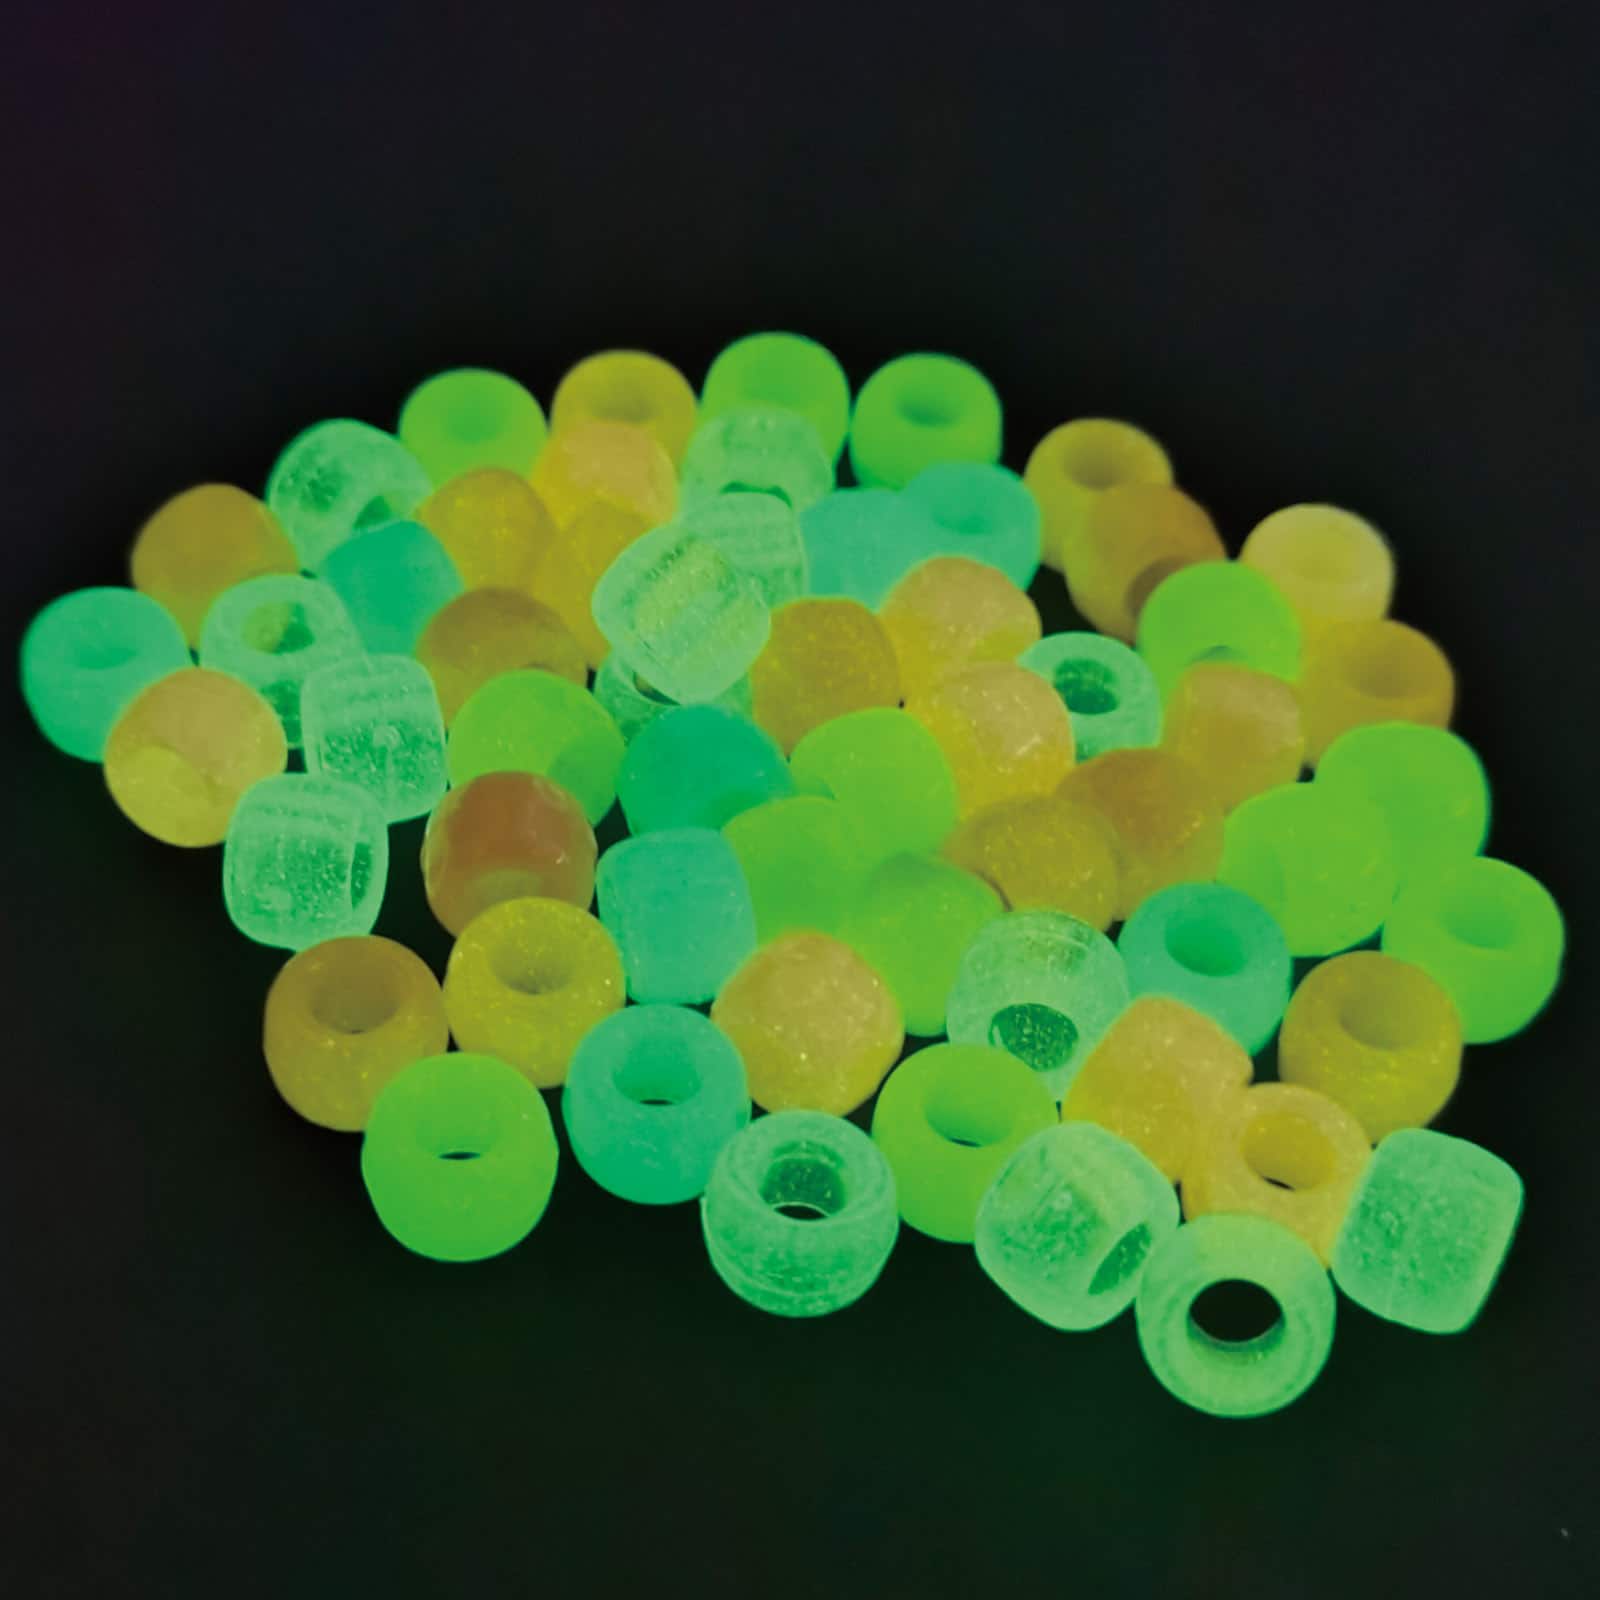 Youthink Fluorescent Material Portable Lure Beads, Luminous Fishing Beads, 10mm/12mm Pool For Stream 10mm